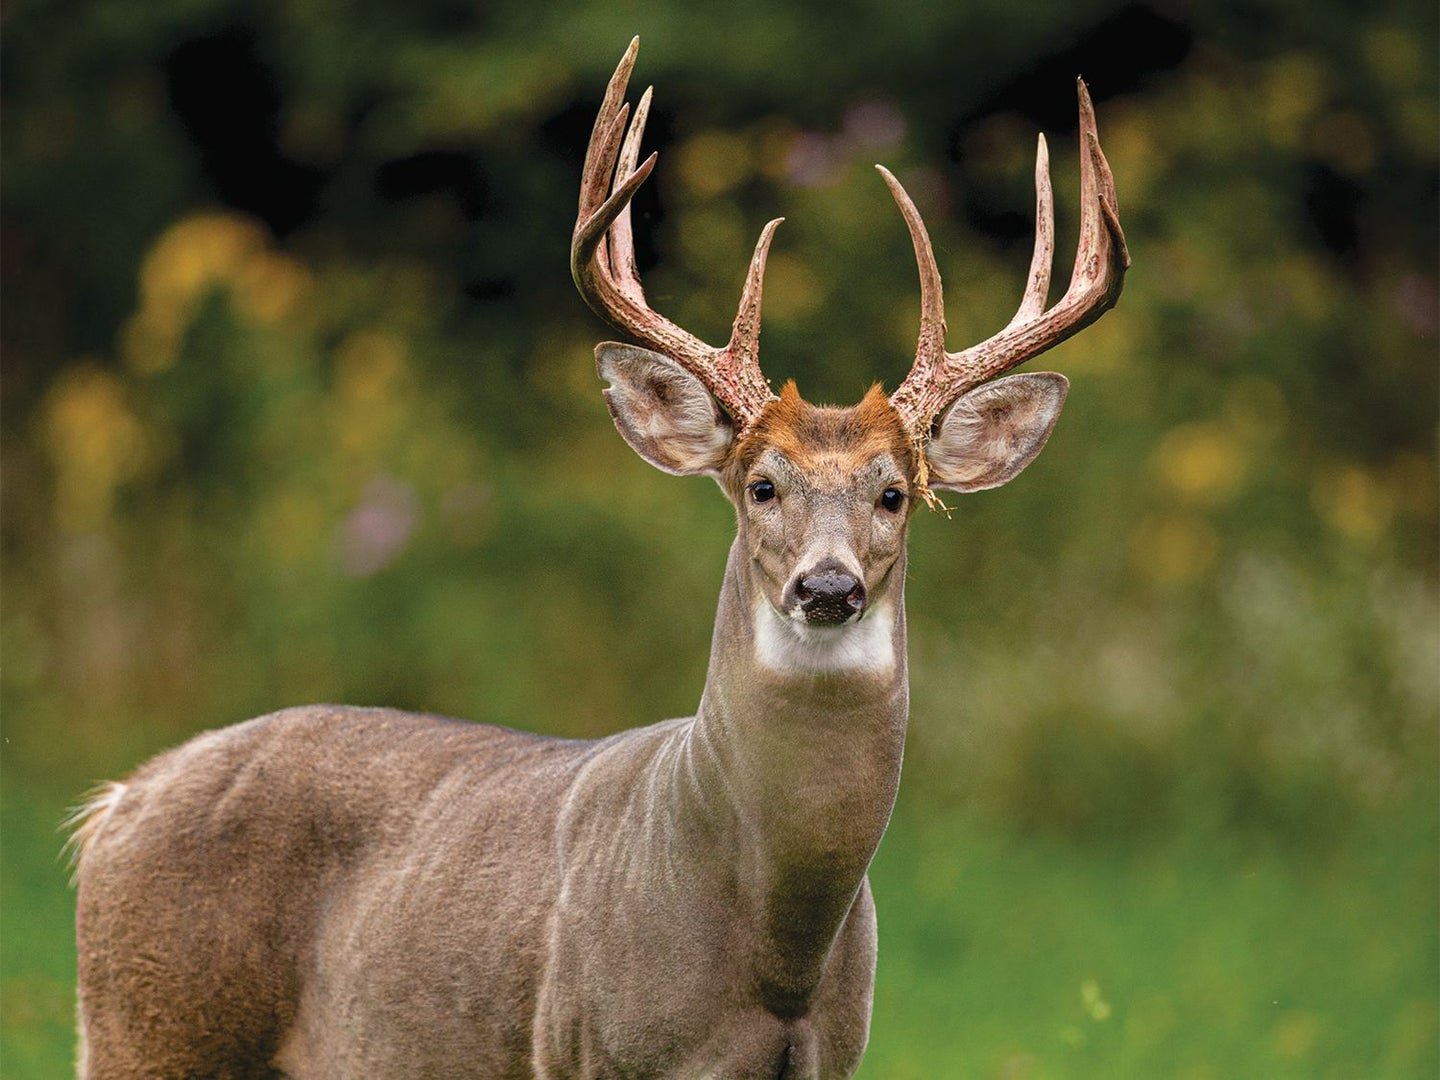 How to Plan the Perfect October Deer Hunt